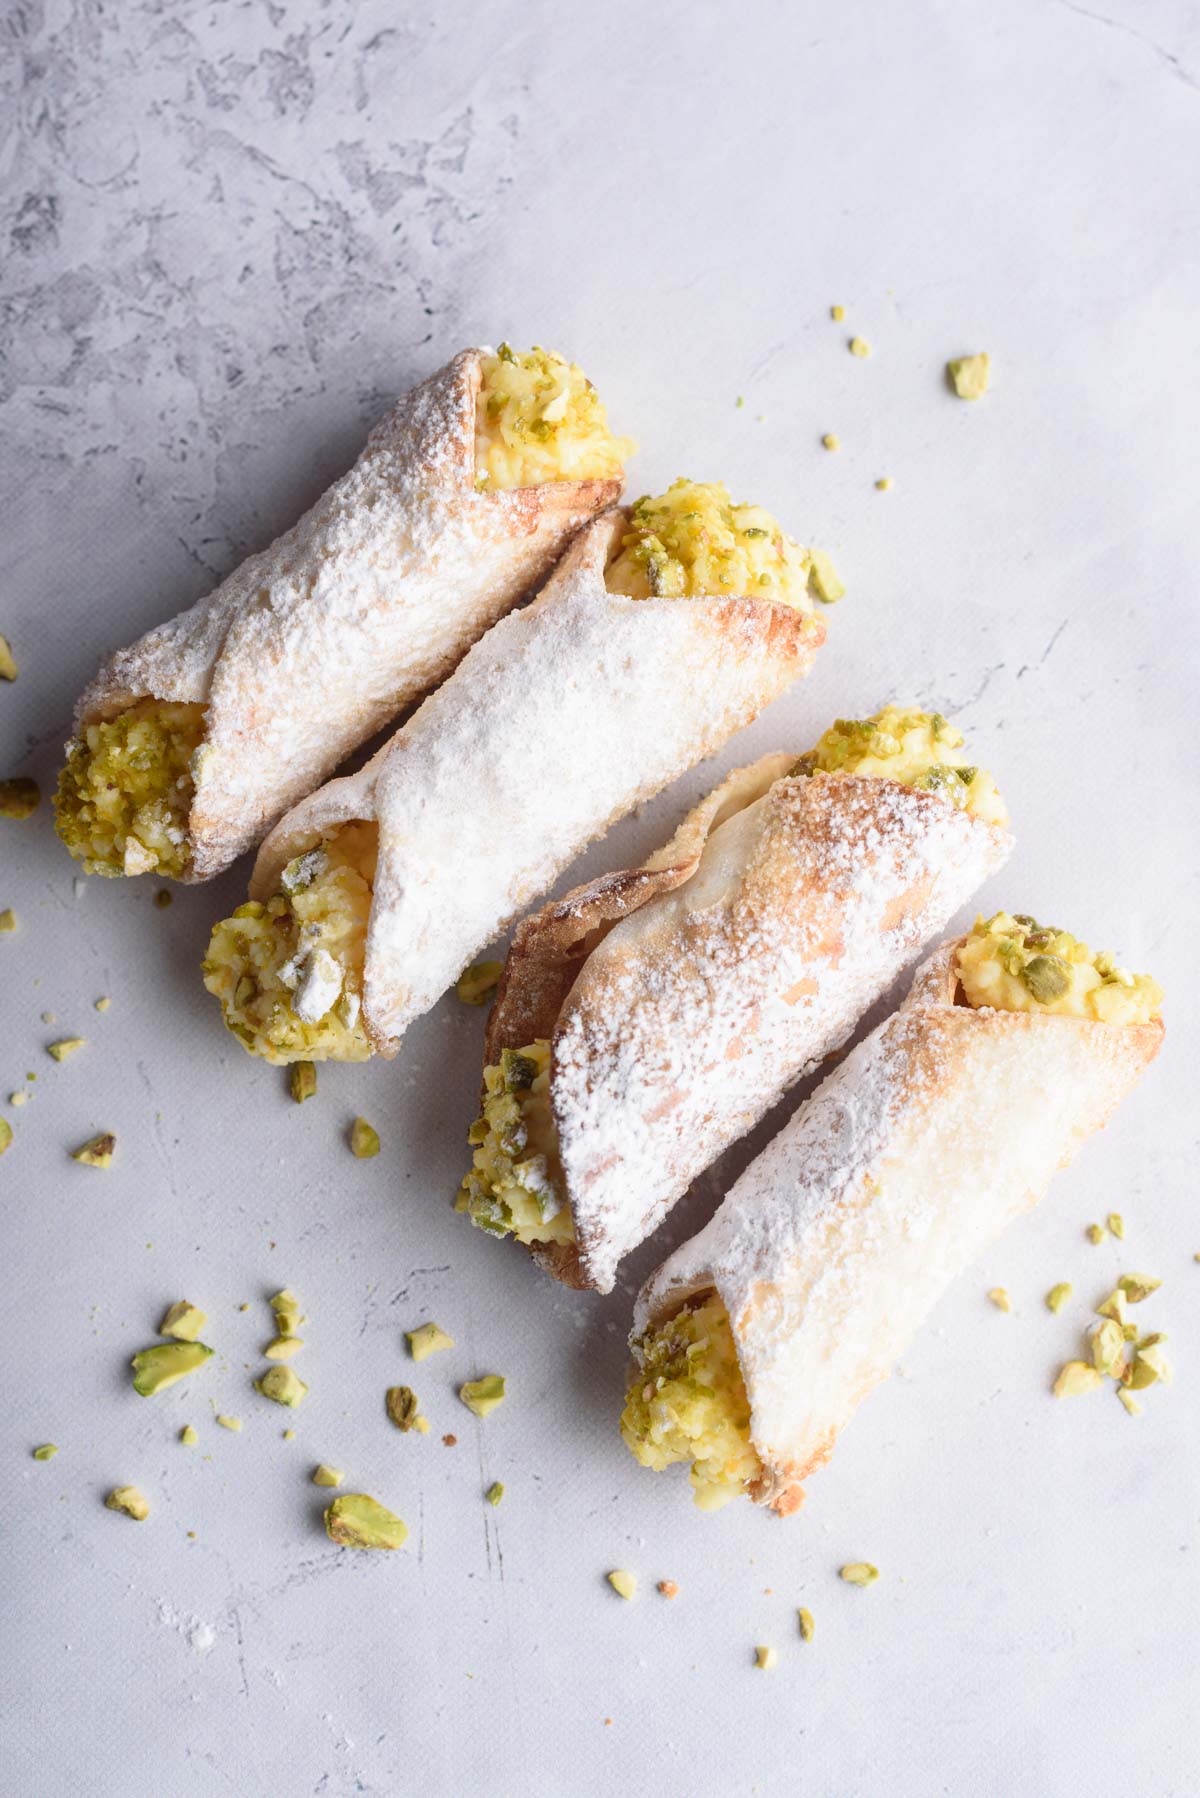 the completed air fryer cannoli recipe ready to be served